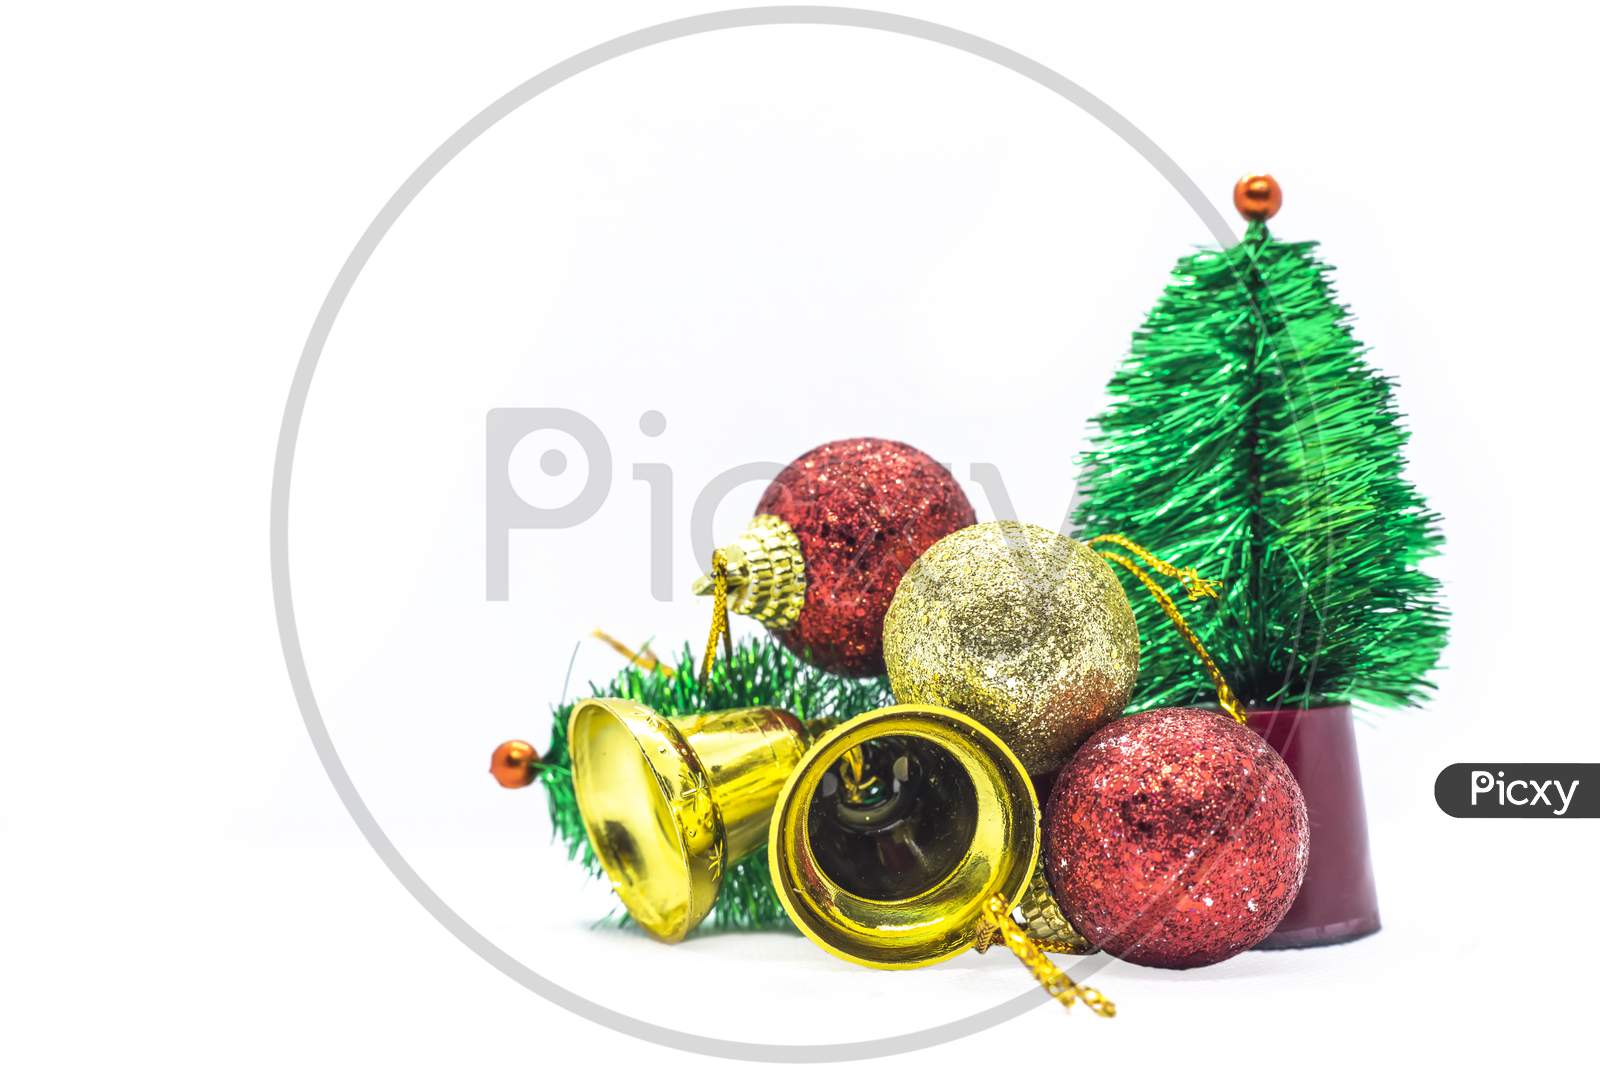 Miniatures: Small Christmas Tree, Golden Bells And Balls On White Background.